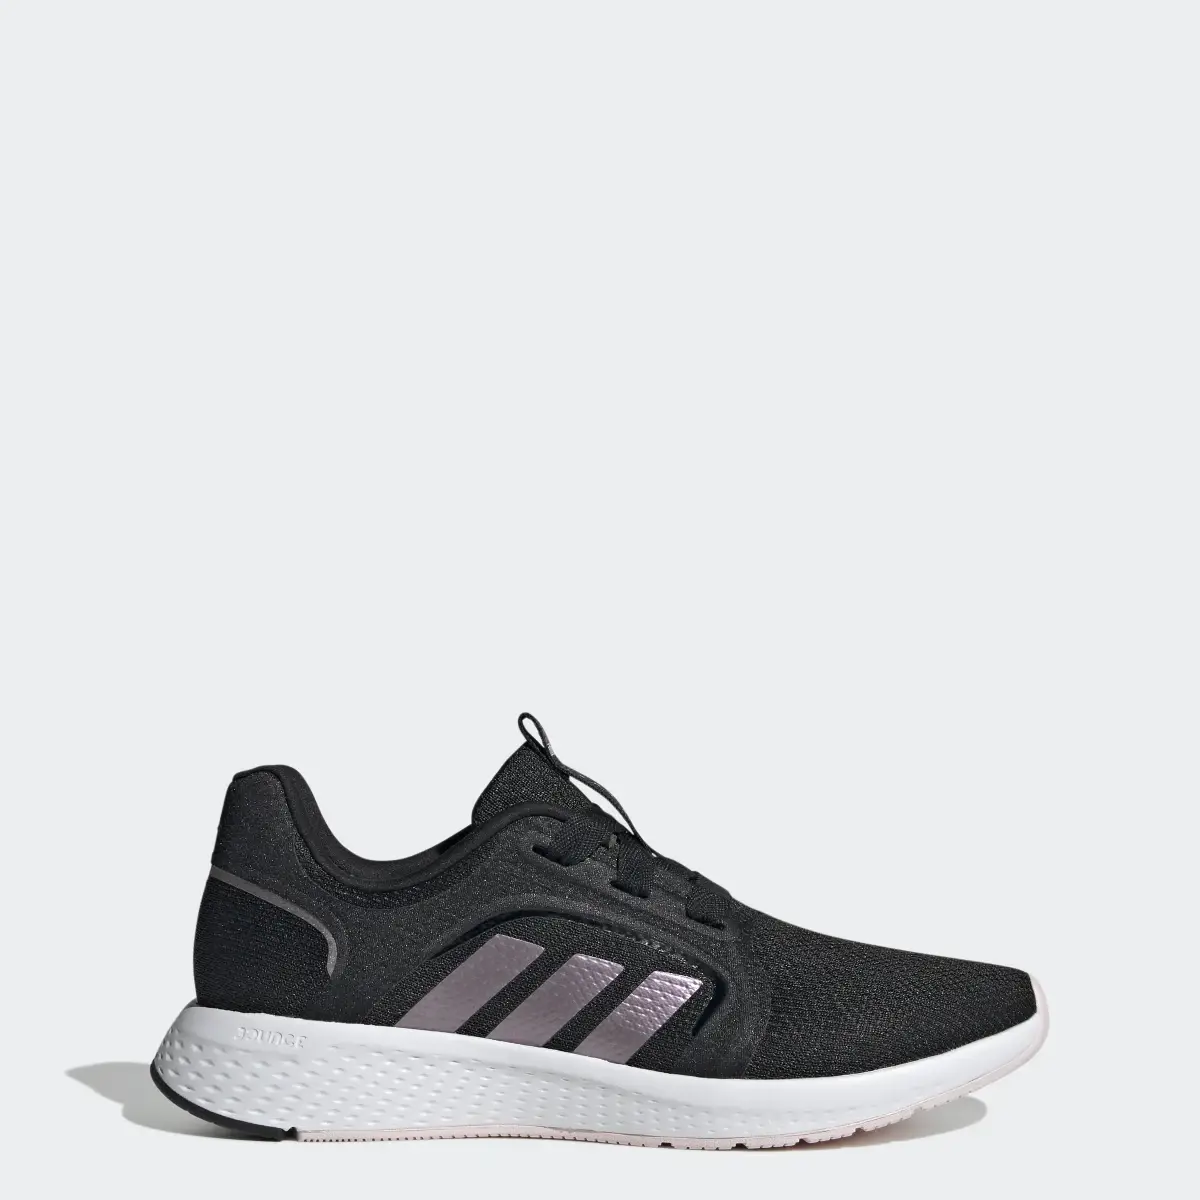 Adidas Edge Lux Shoes. 1